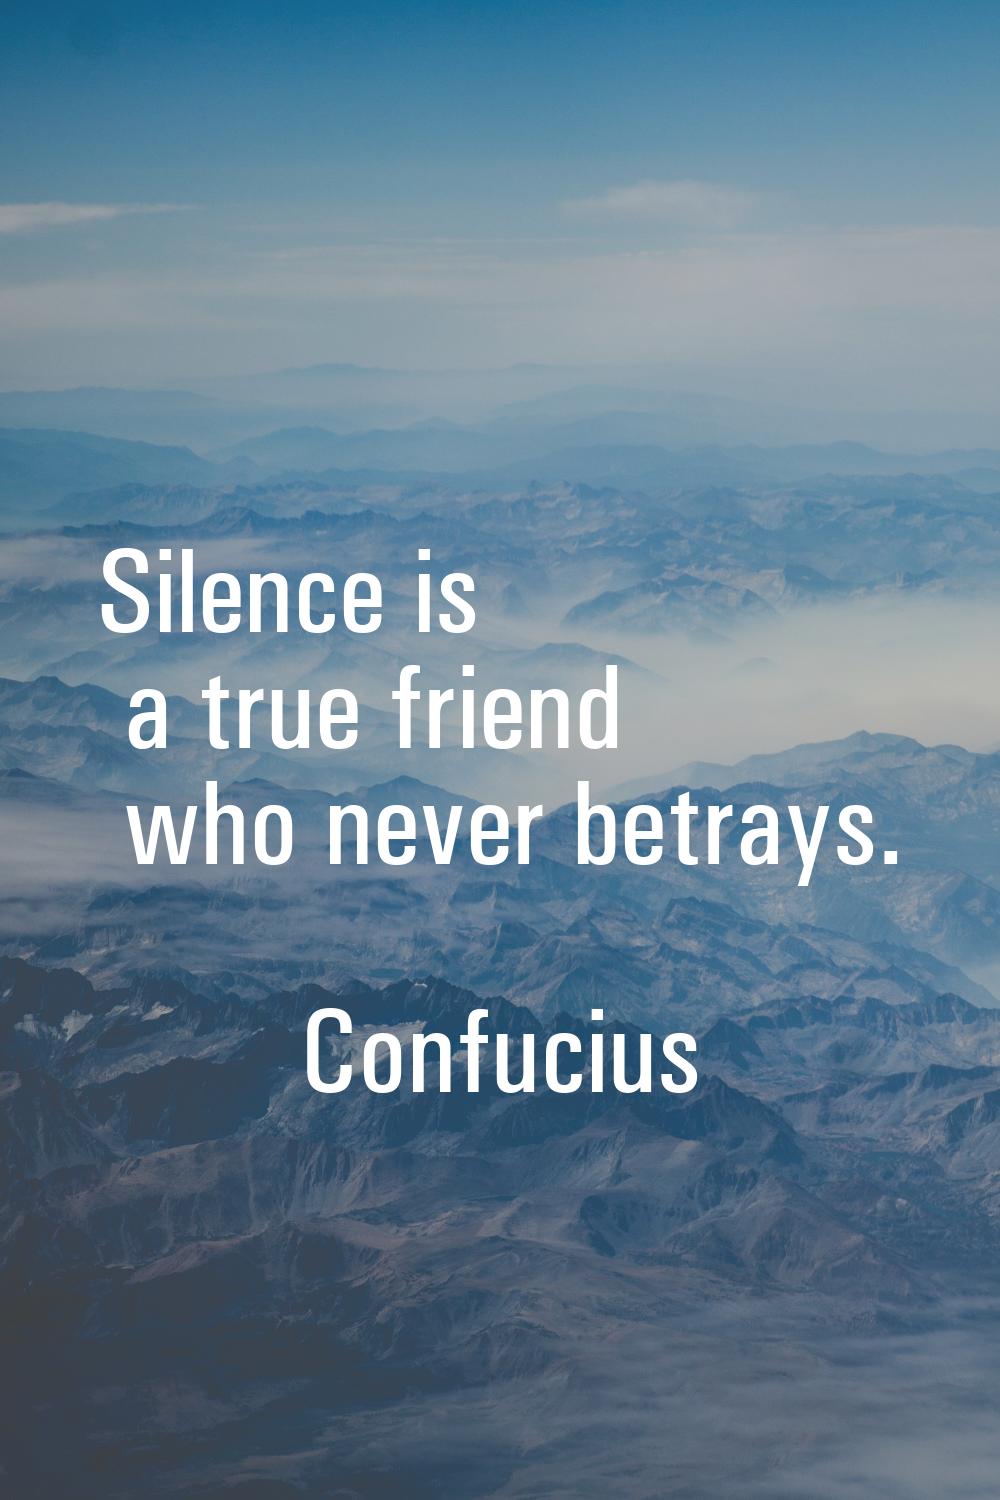 Silence is a true friend who never betrays.